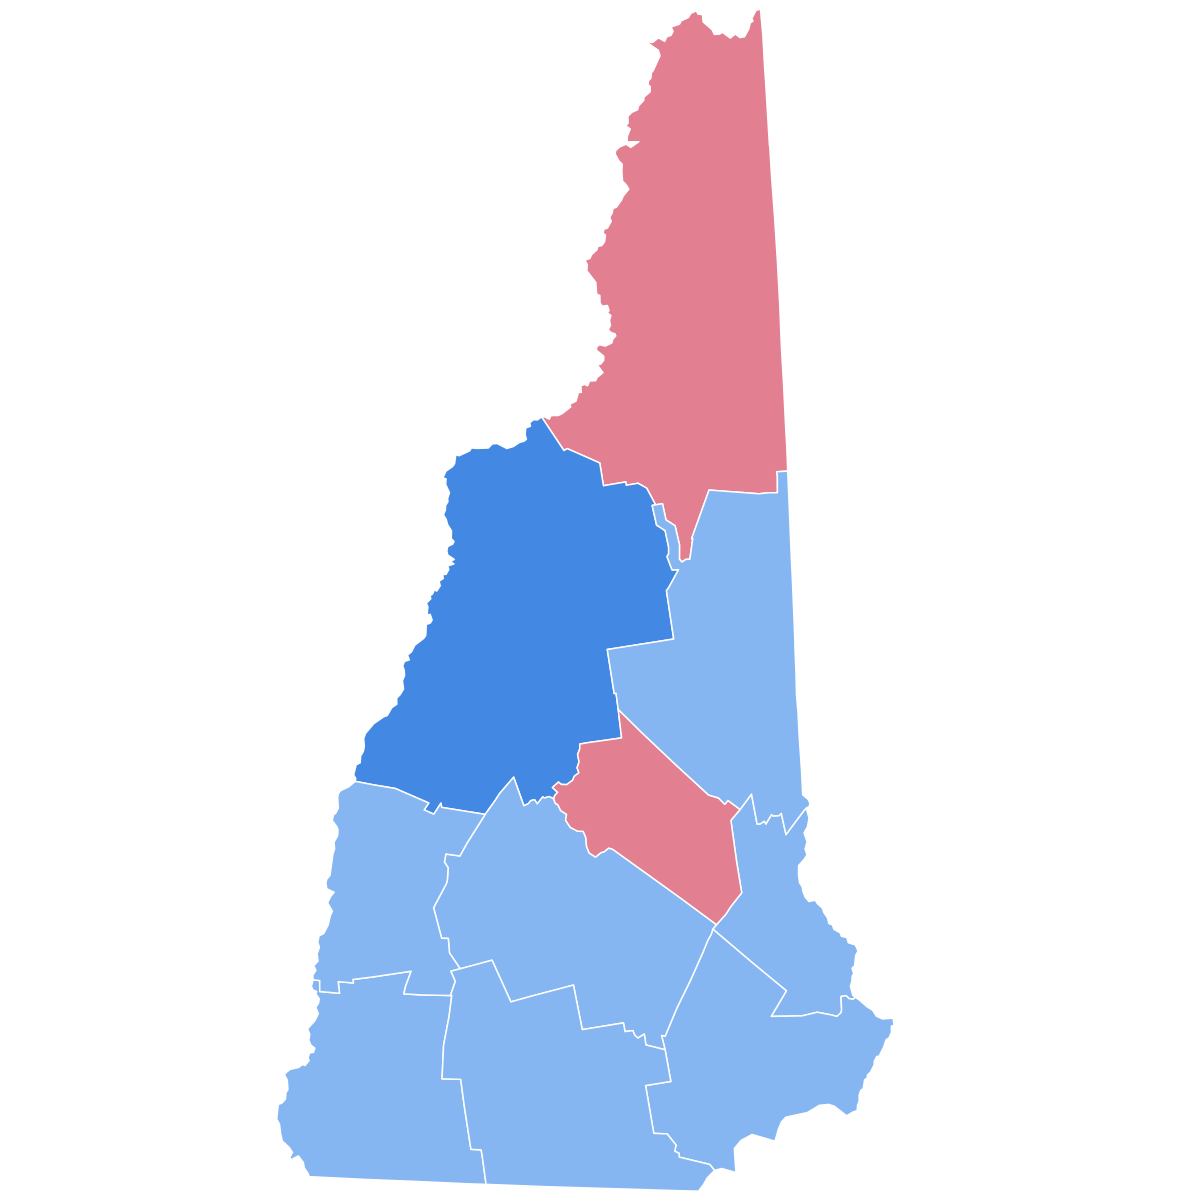 2020 united states presidential election in new hampshire